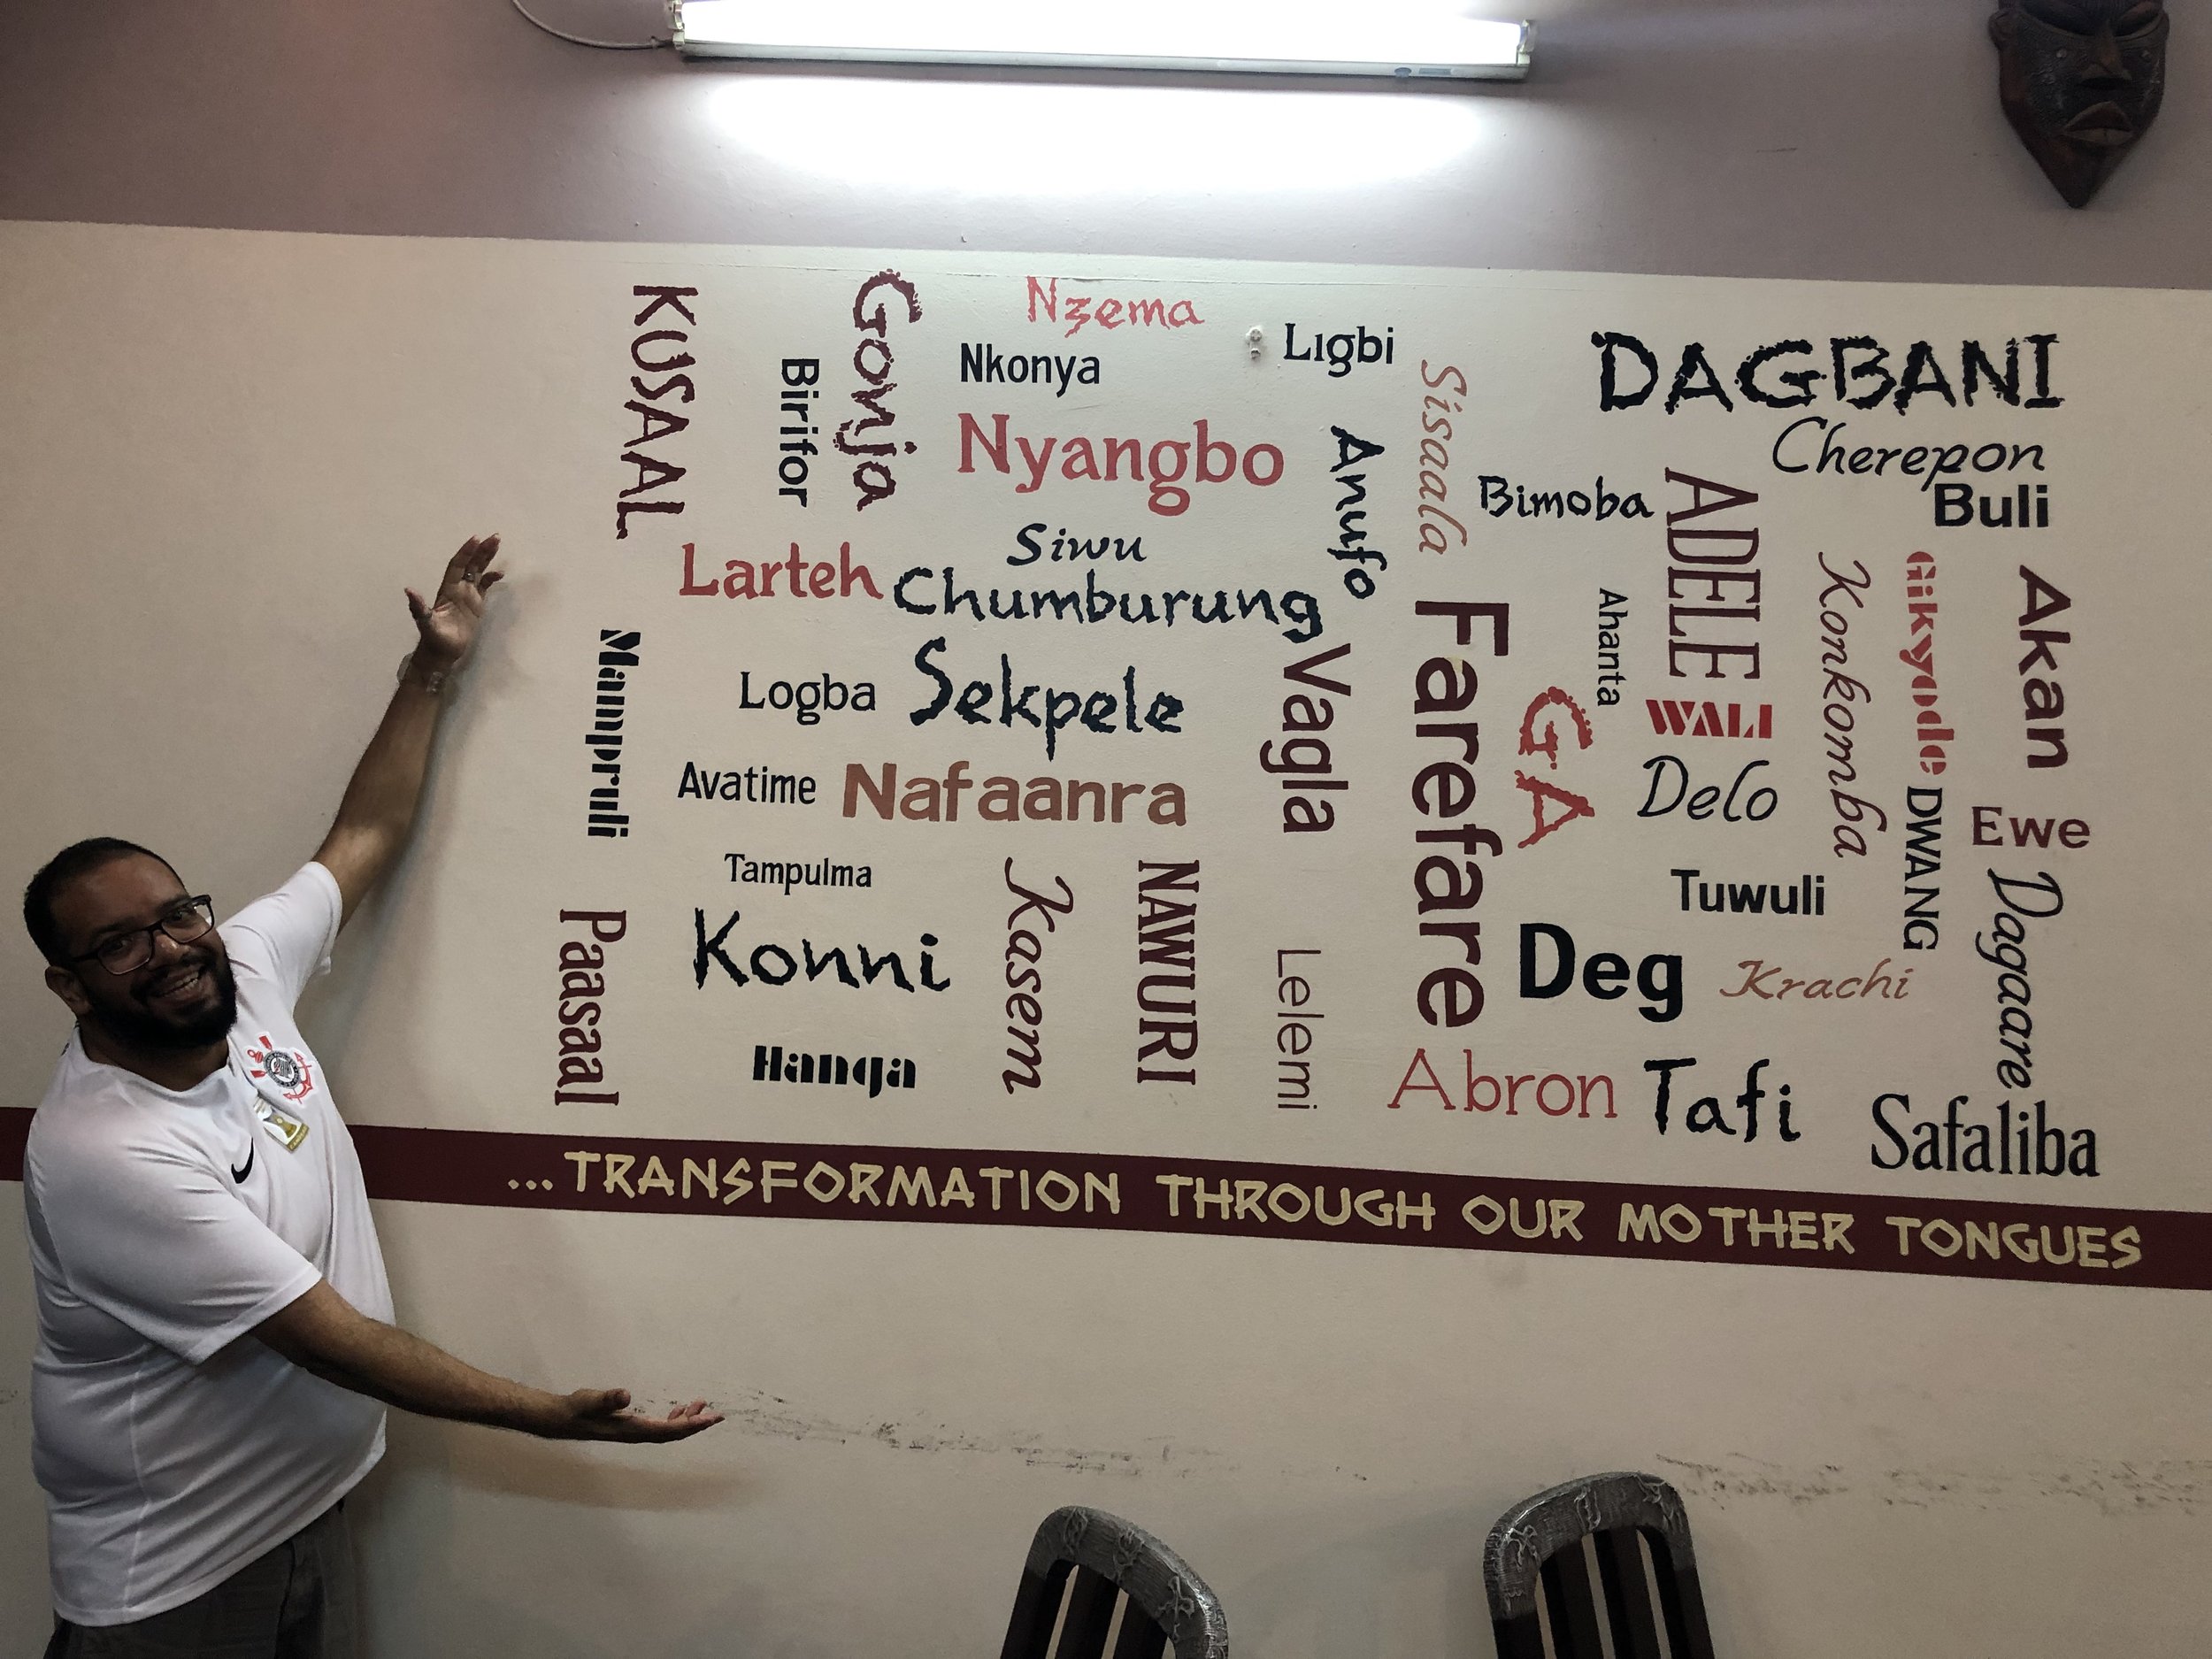  William Ramos at the Linguistic Institute of Ghana by a display of some of the languages in the country 